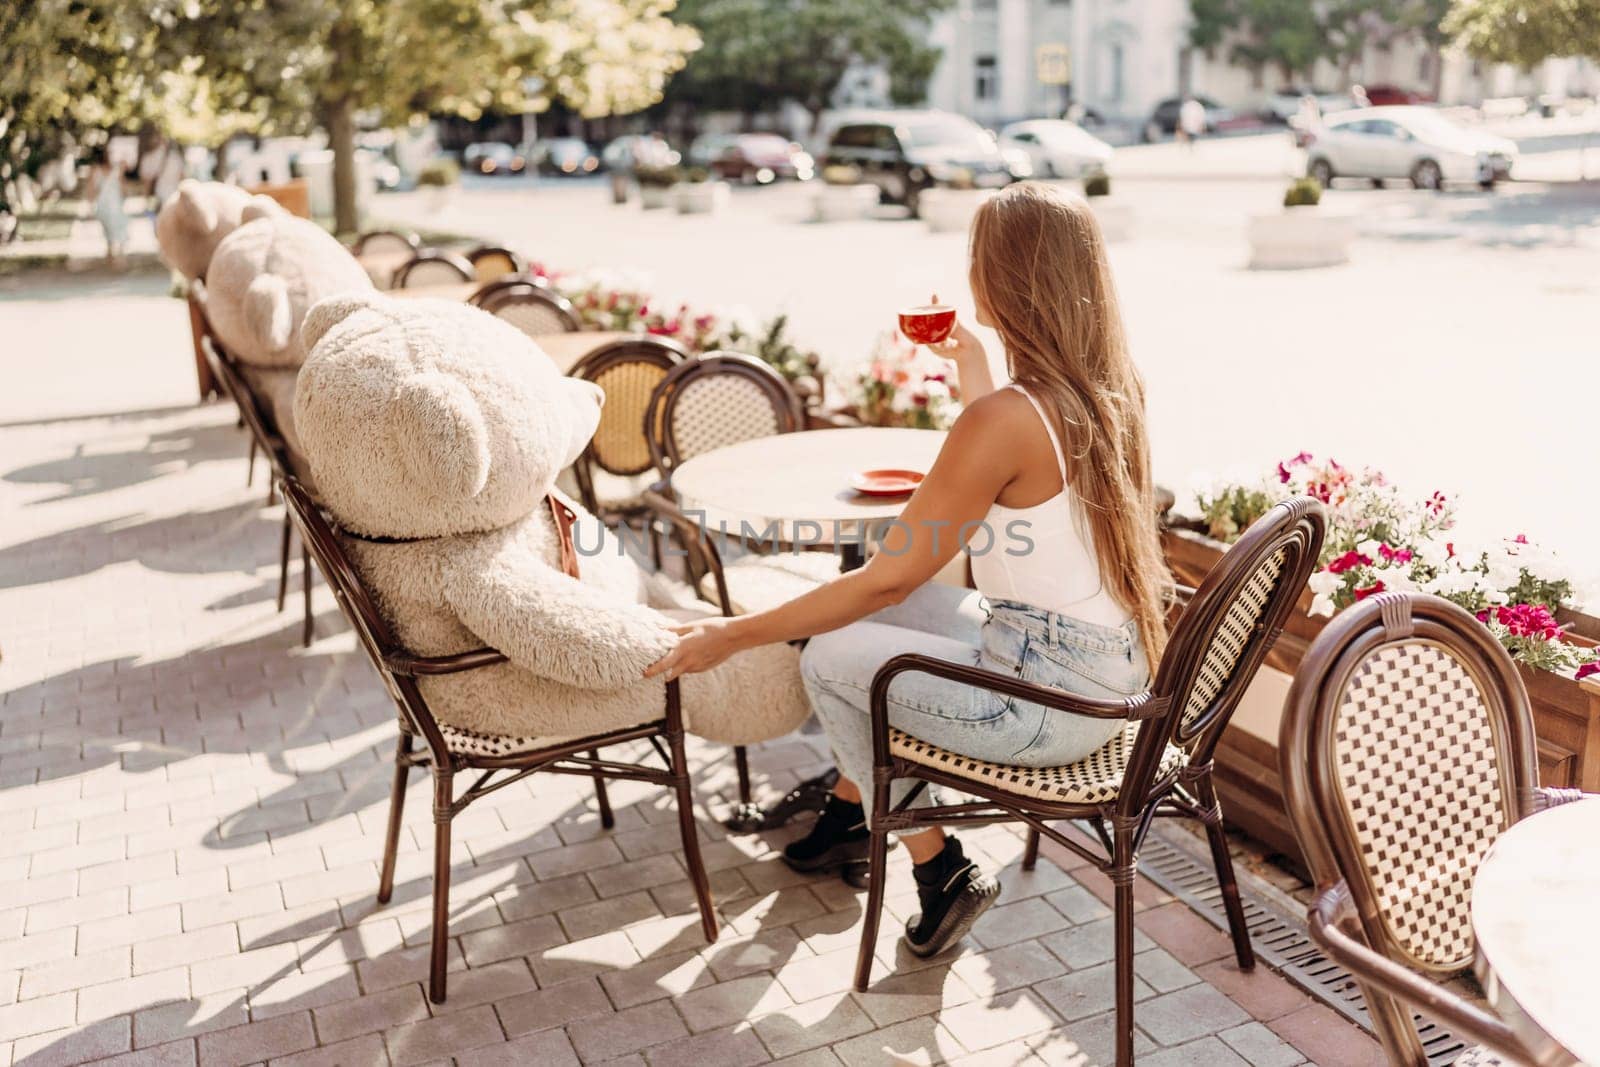 A woman sits cafe with a teddy bear next to her. The scene is set in a city with several chairs and tables around her. The woman is enjoying her time at the outdoor cafe. by Matiunina